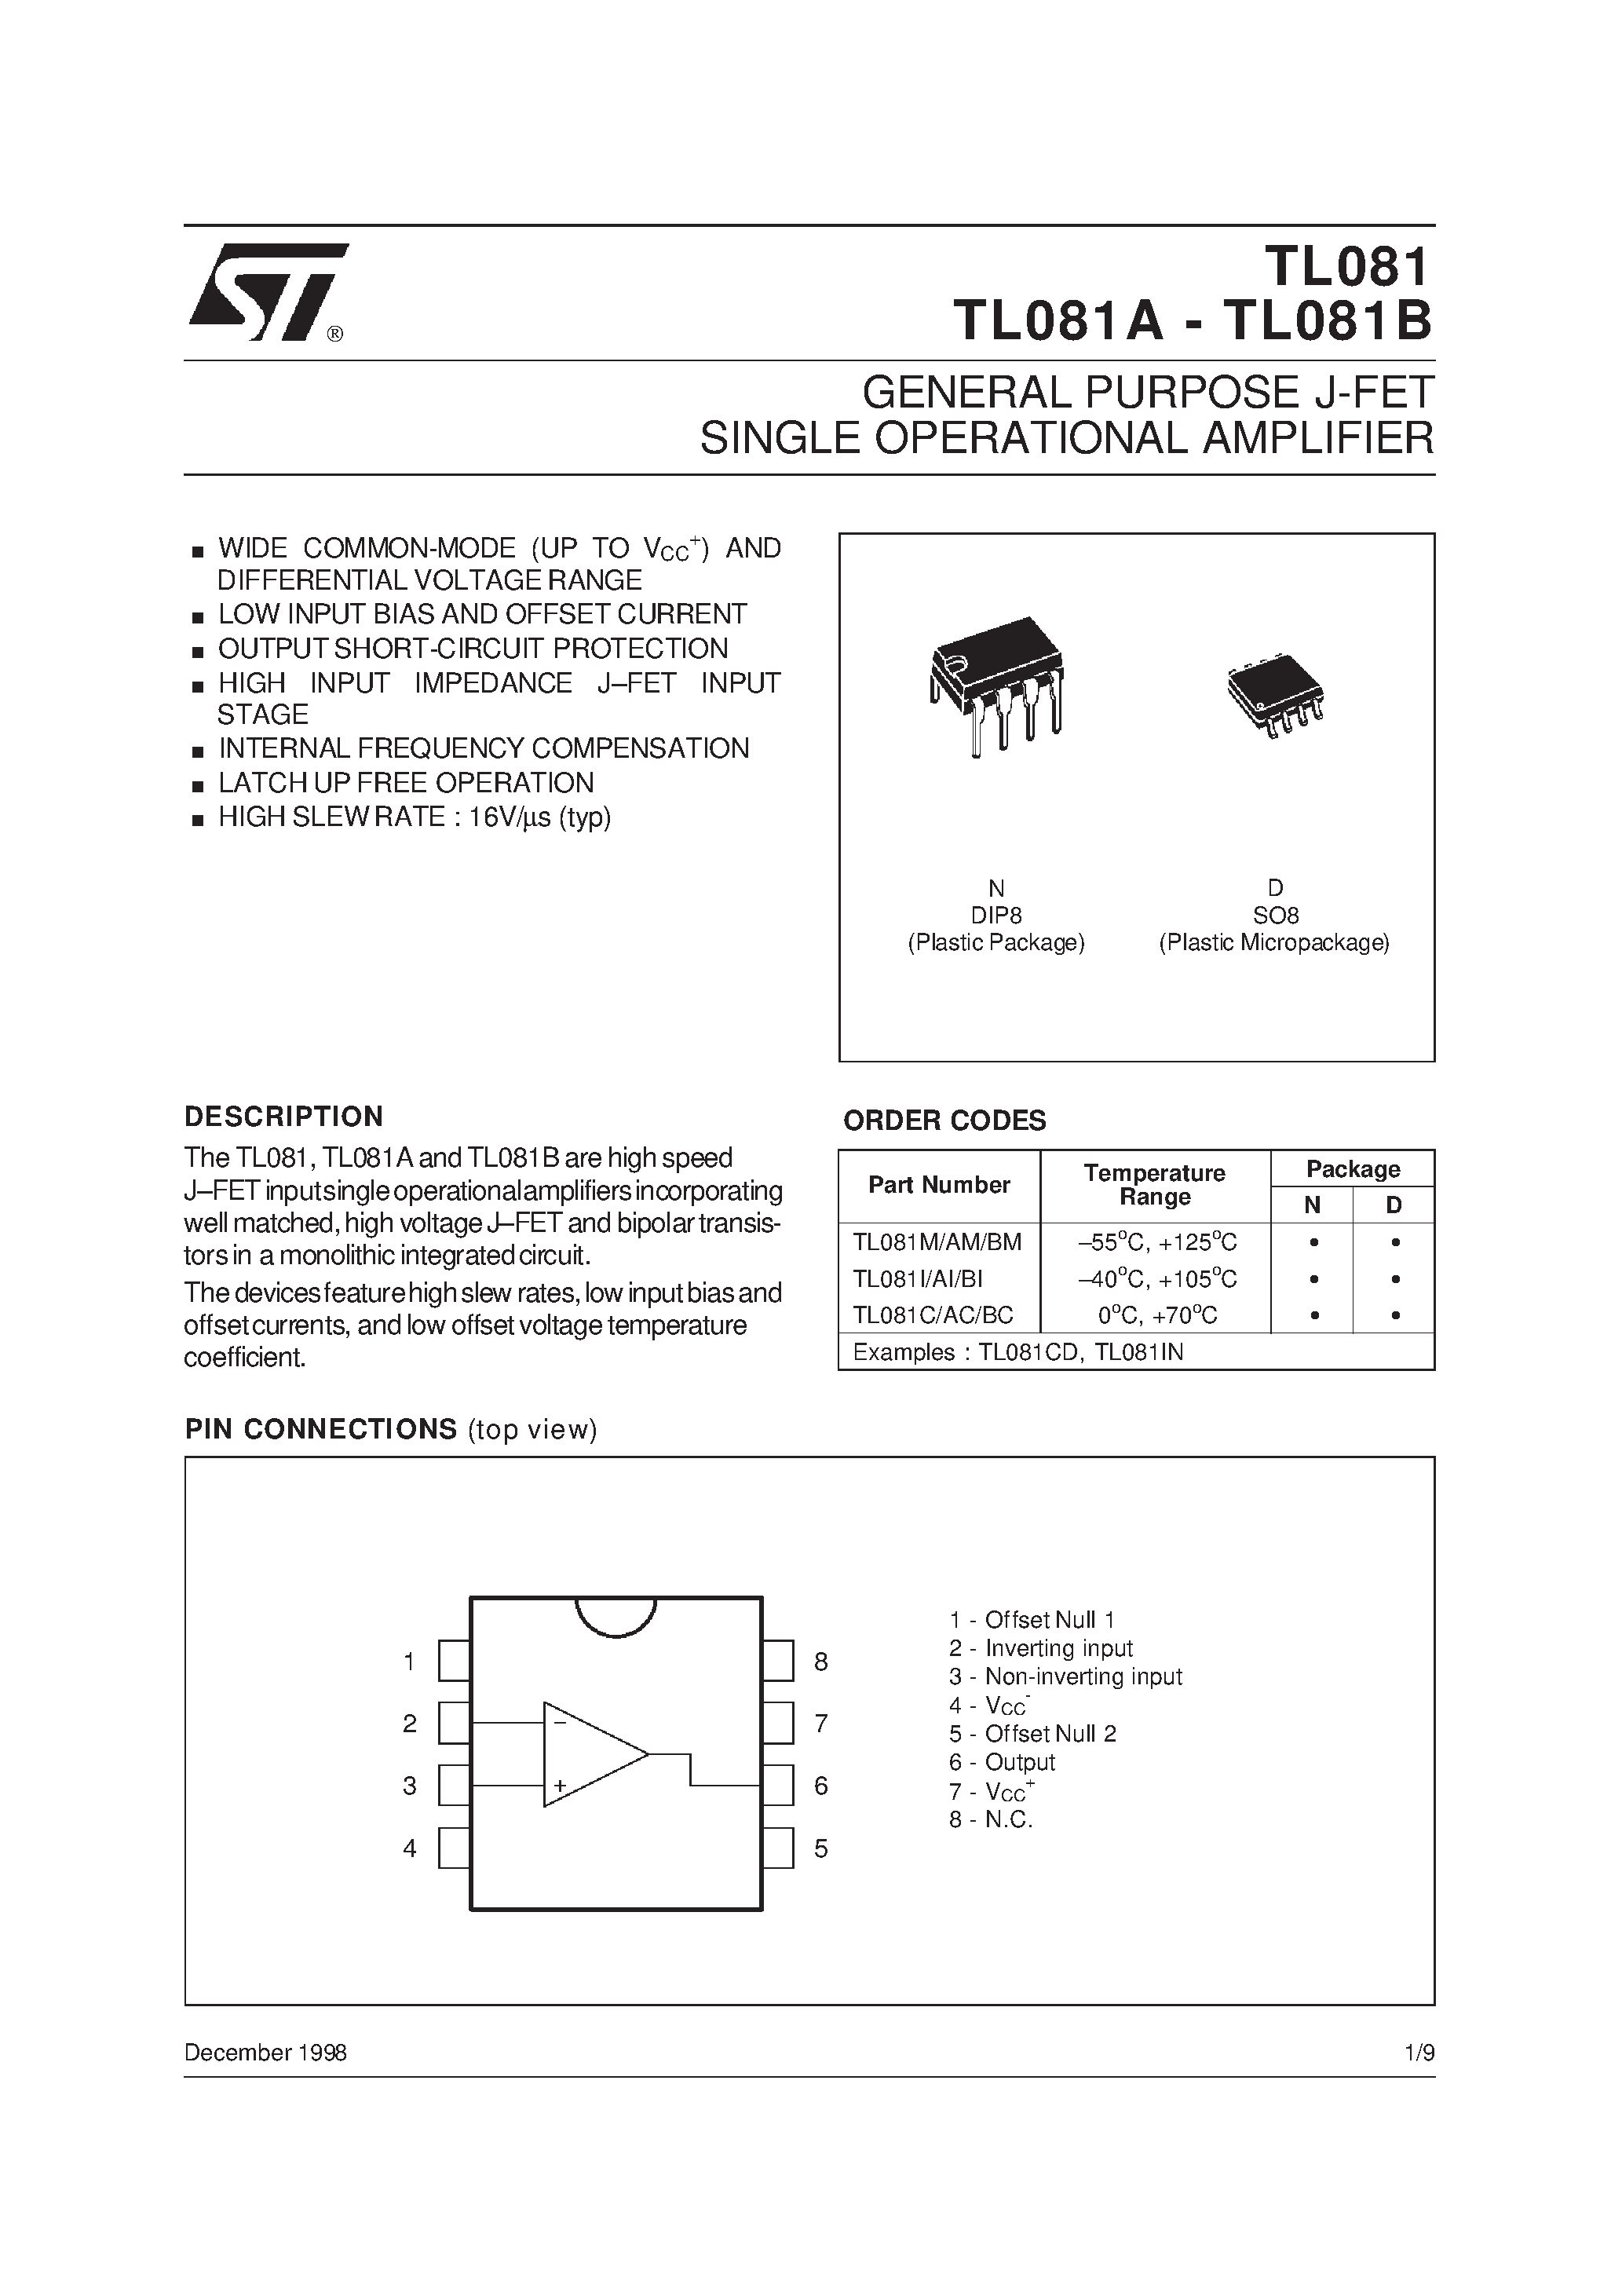 Даташит TL081IN - GENERAL PURPOSE J-FET SINGLE OPERATIONAL AMPLIFIER страница 1